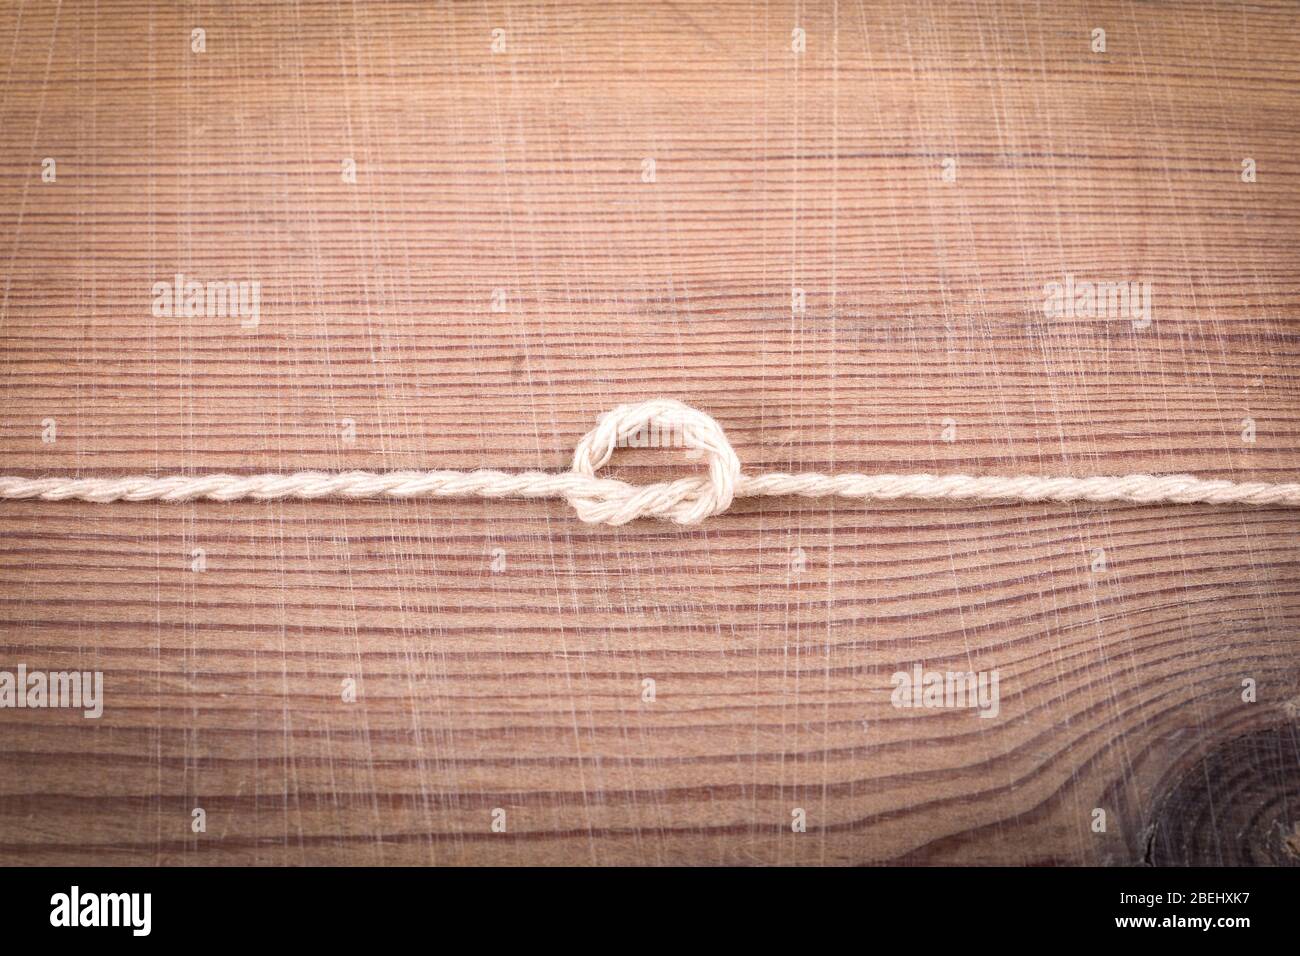 Overhand Knot. Example of training and information. White cord on a wooden background Stock Photo